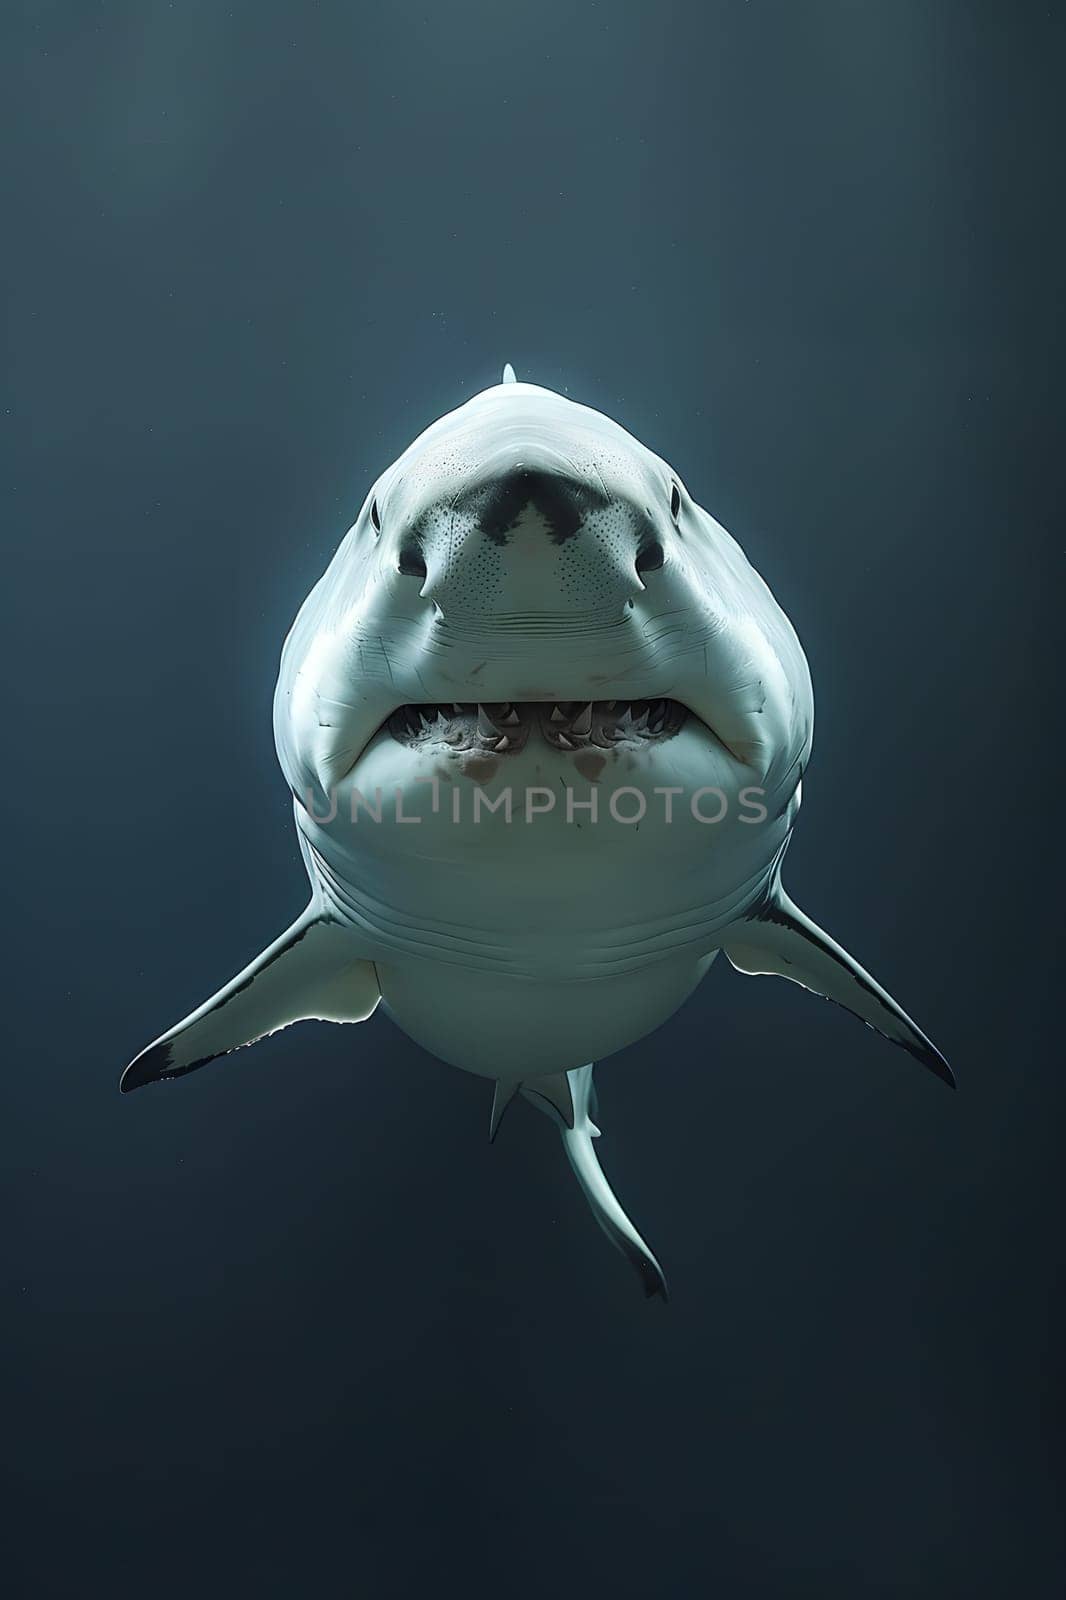 A Lamniformes shark is gracefully swimming in the underwater, showing its powerful fin and observing the camera in the vast liquid world of the ocean